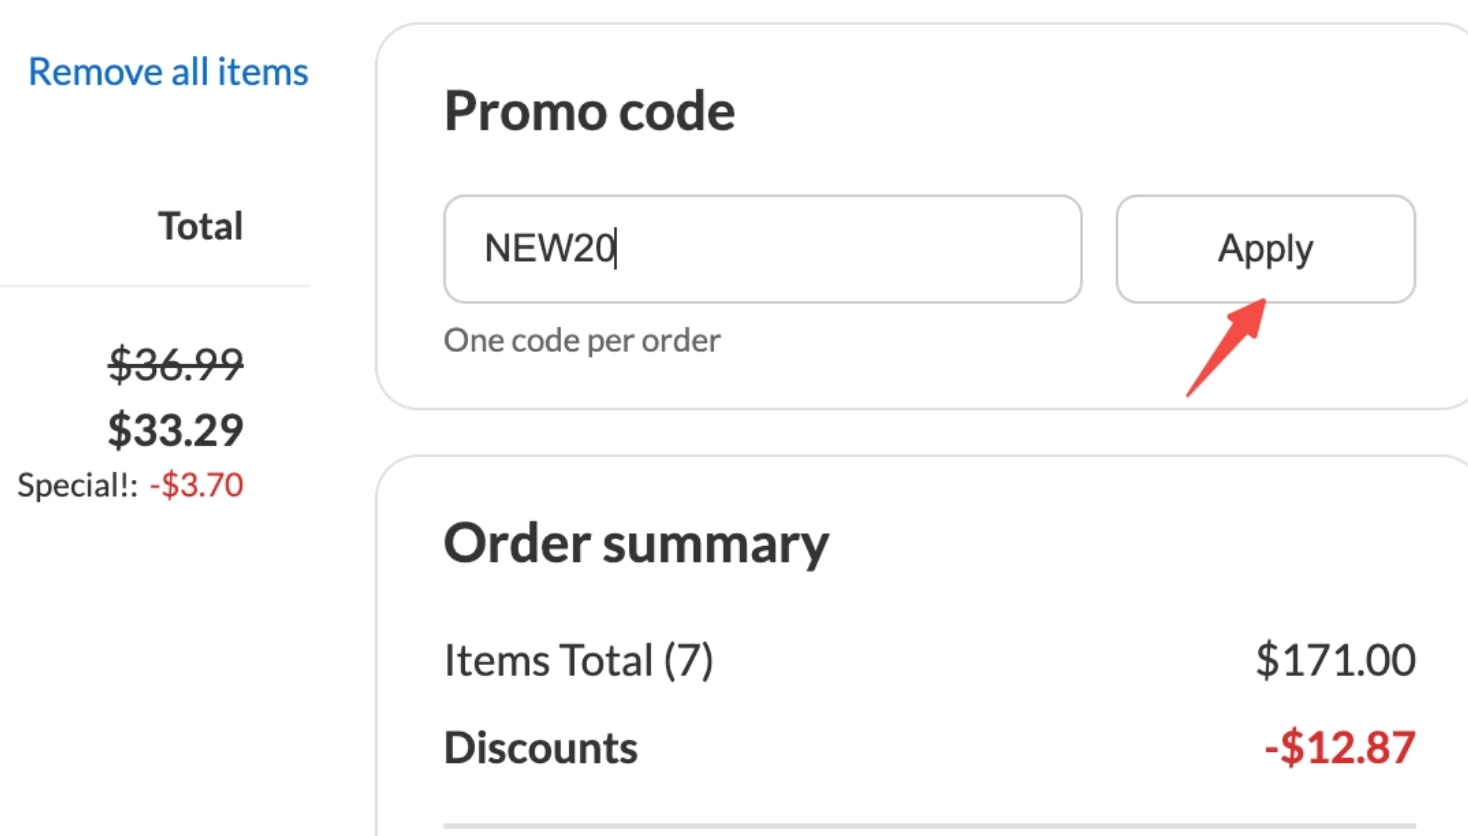 Step 3: When checking out at gshock.com.au, paste the discount code into the specified promotional code box.